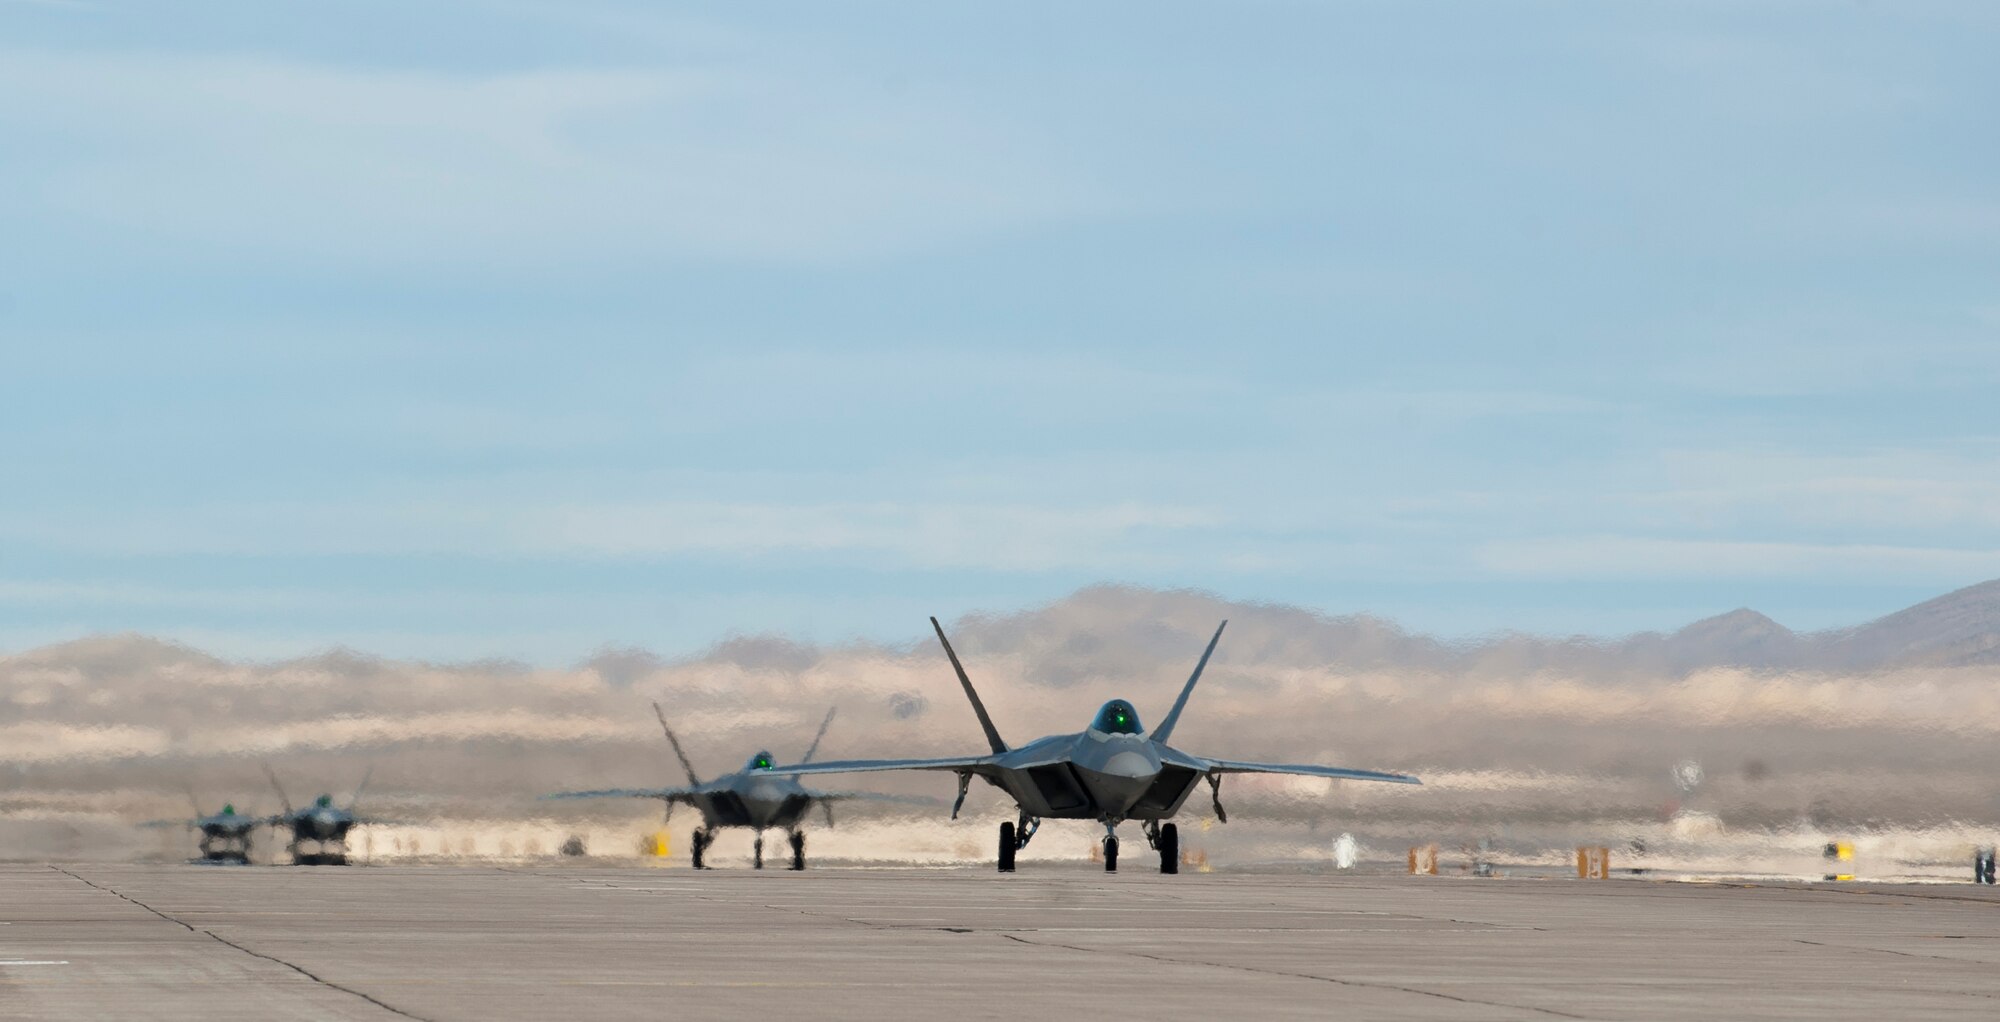 Four F-22 Raptors assigned to the 94th Fighter Squadron, Joint Base Langley-Eustis, Va., taxi to the runway during Red Flag 15-1 at Nellis Air Force Base, Nev., Feb. 6, 2015. Red Flag provides a series of intense air-to-air combat scenarios for aircrew and ground personnel which will increase their combat readiness and effectiveness for future real world missions. (U.S. Air Force photo by Senior Airman Thomas Spangler)